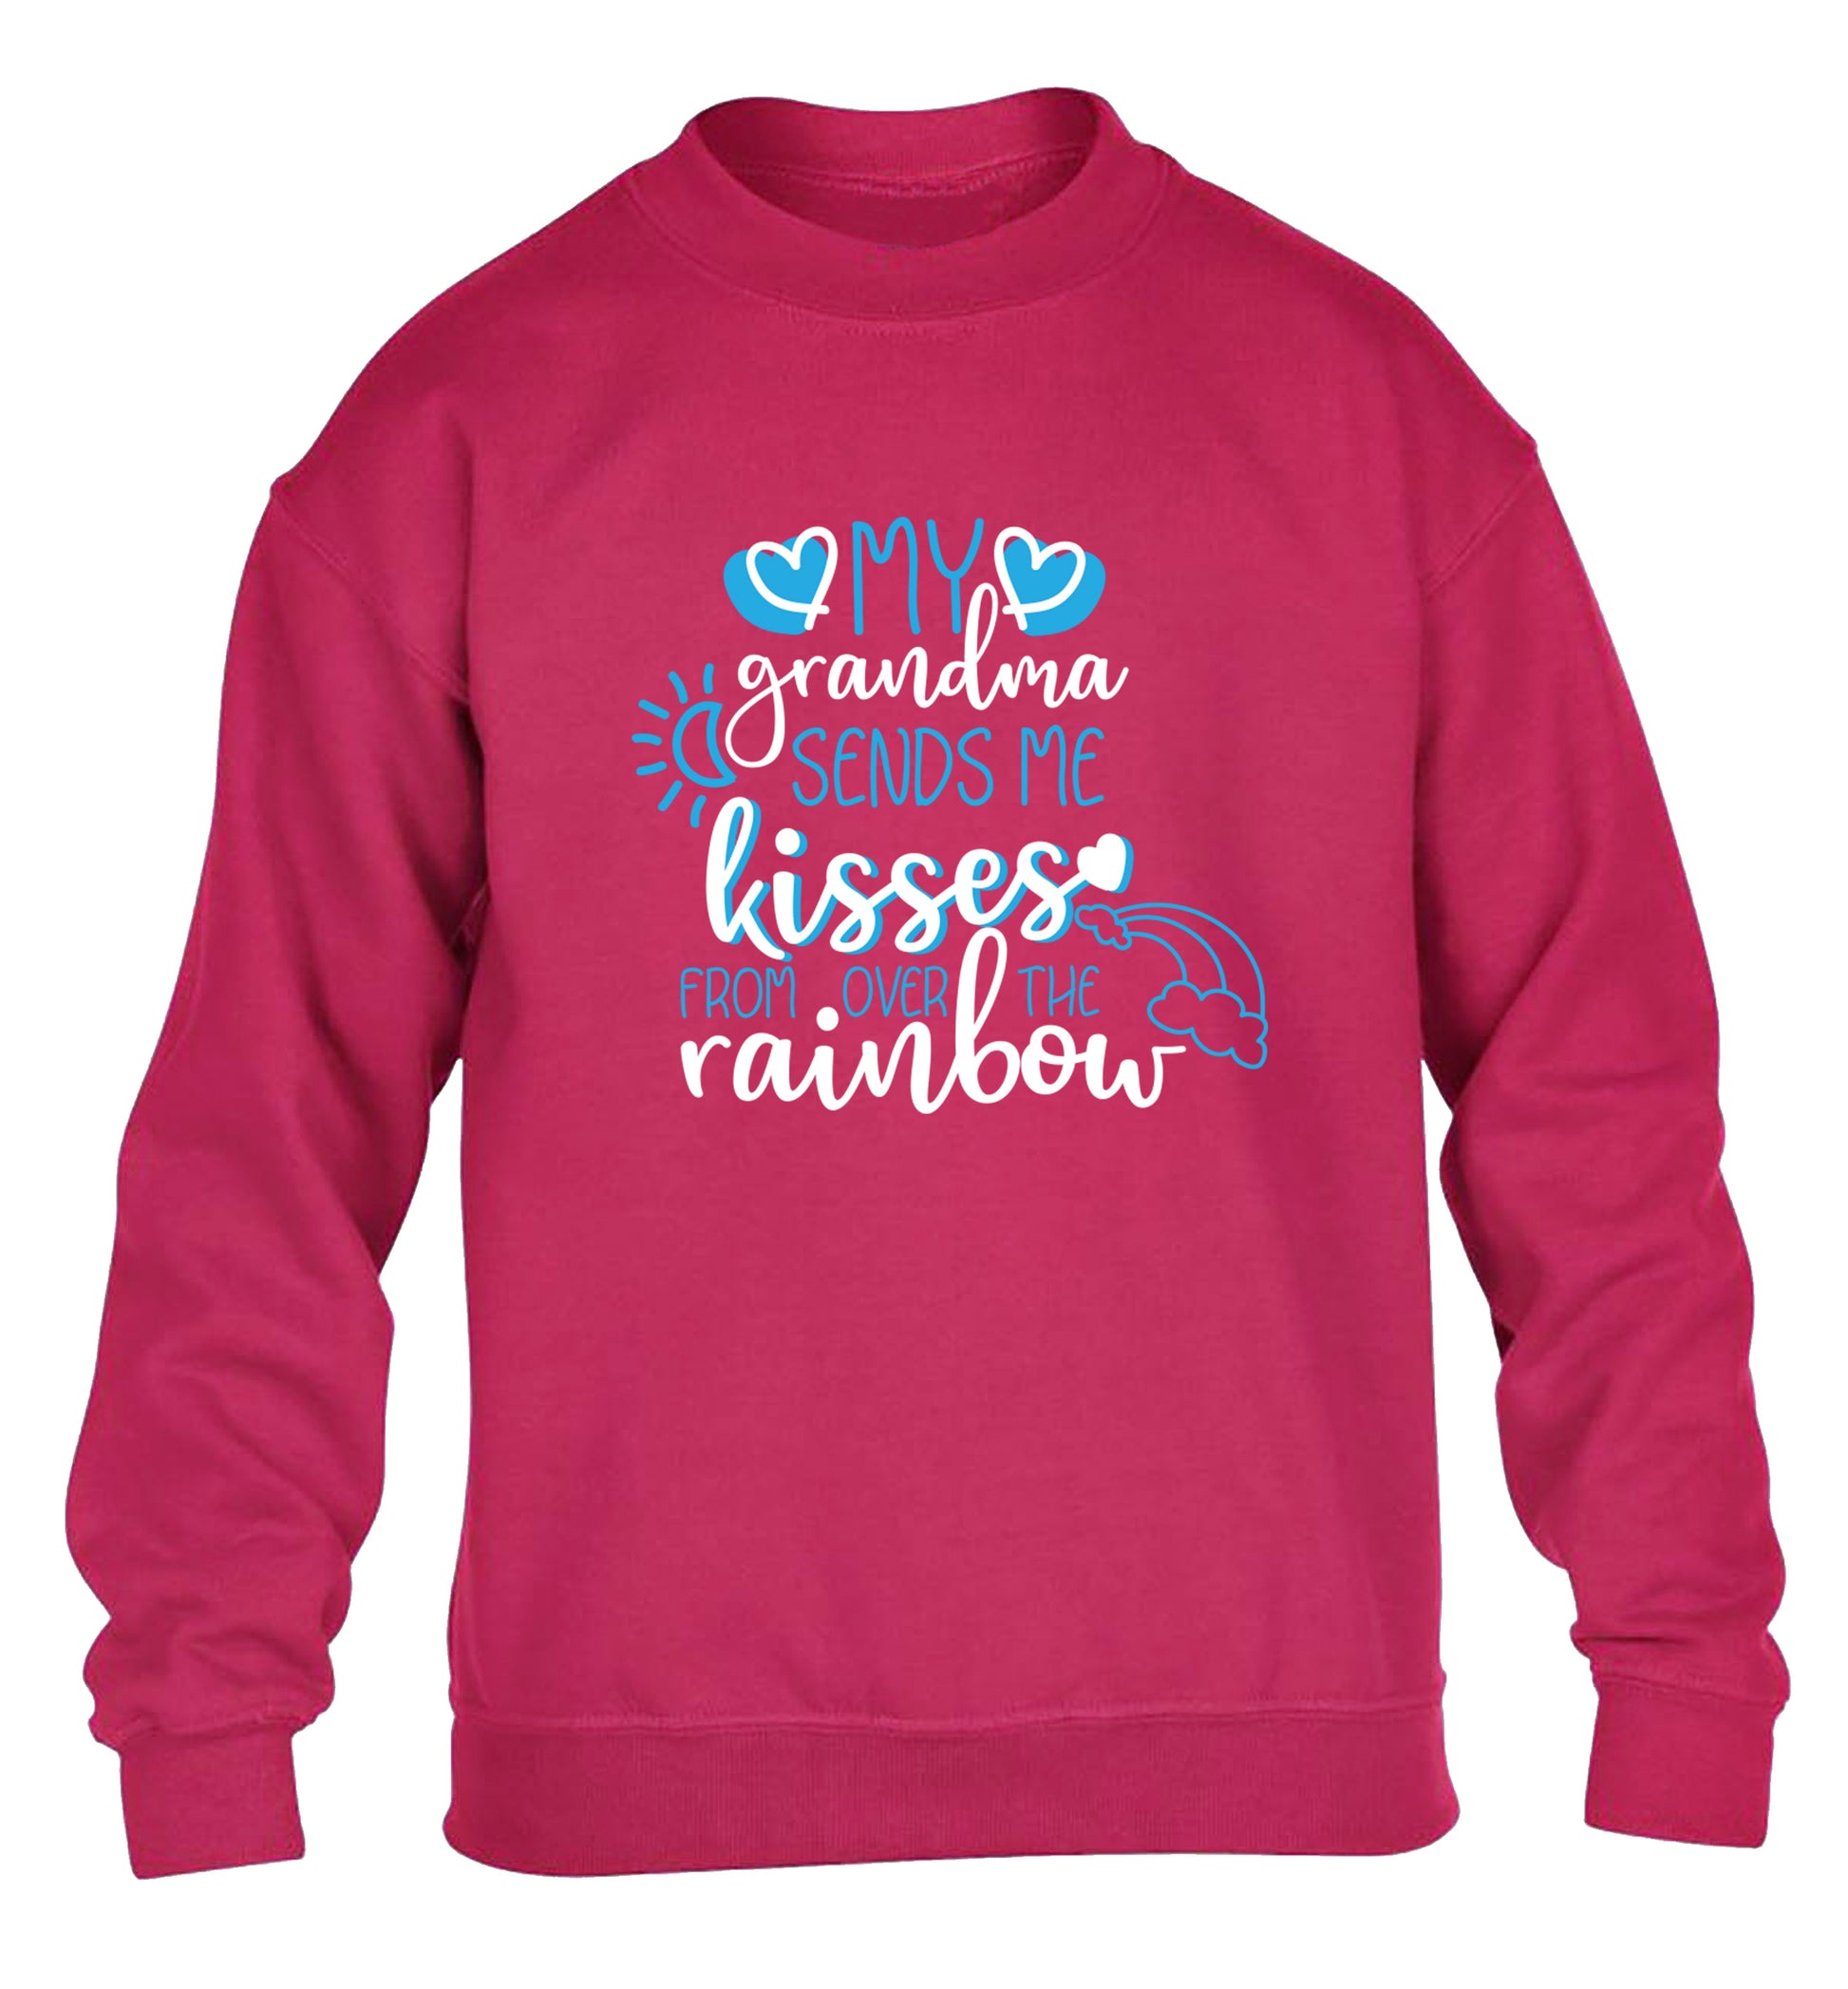 My grandma sends me kisses from over the rainbow children's pink sweater 12-13 Years